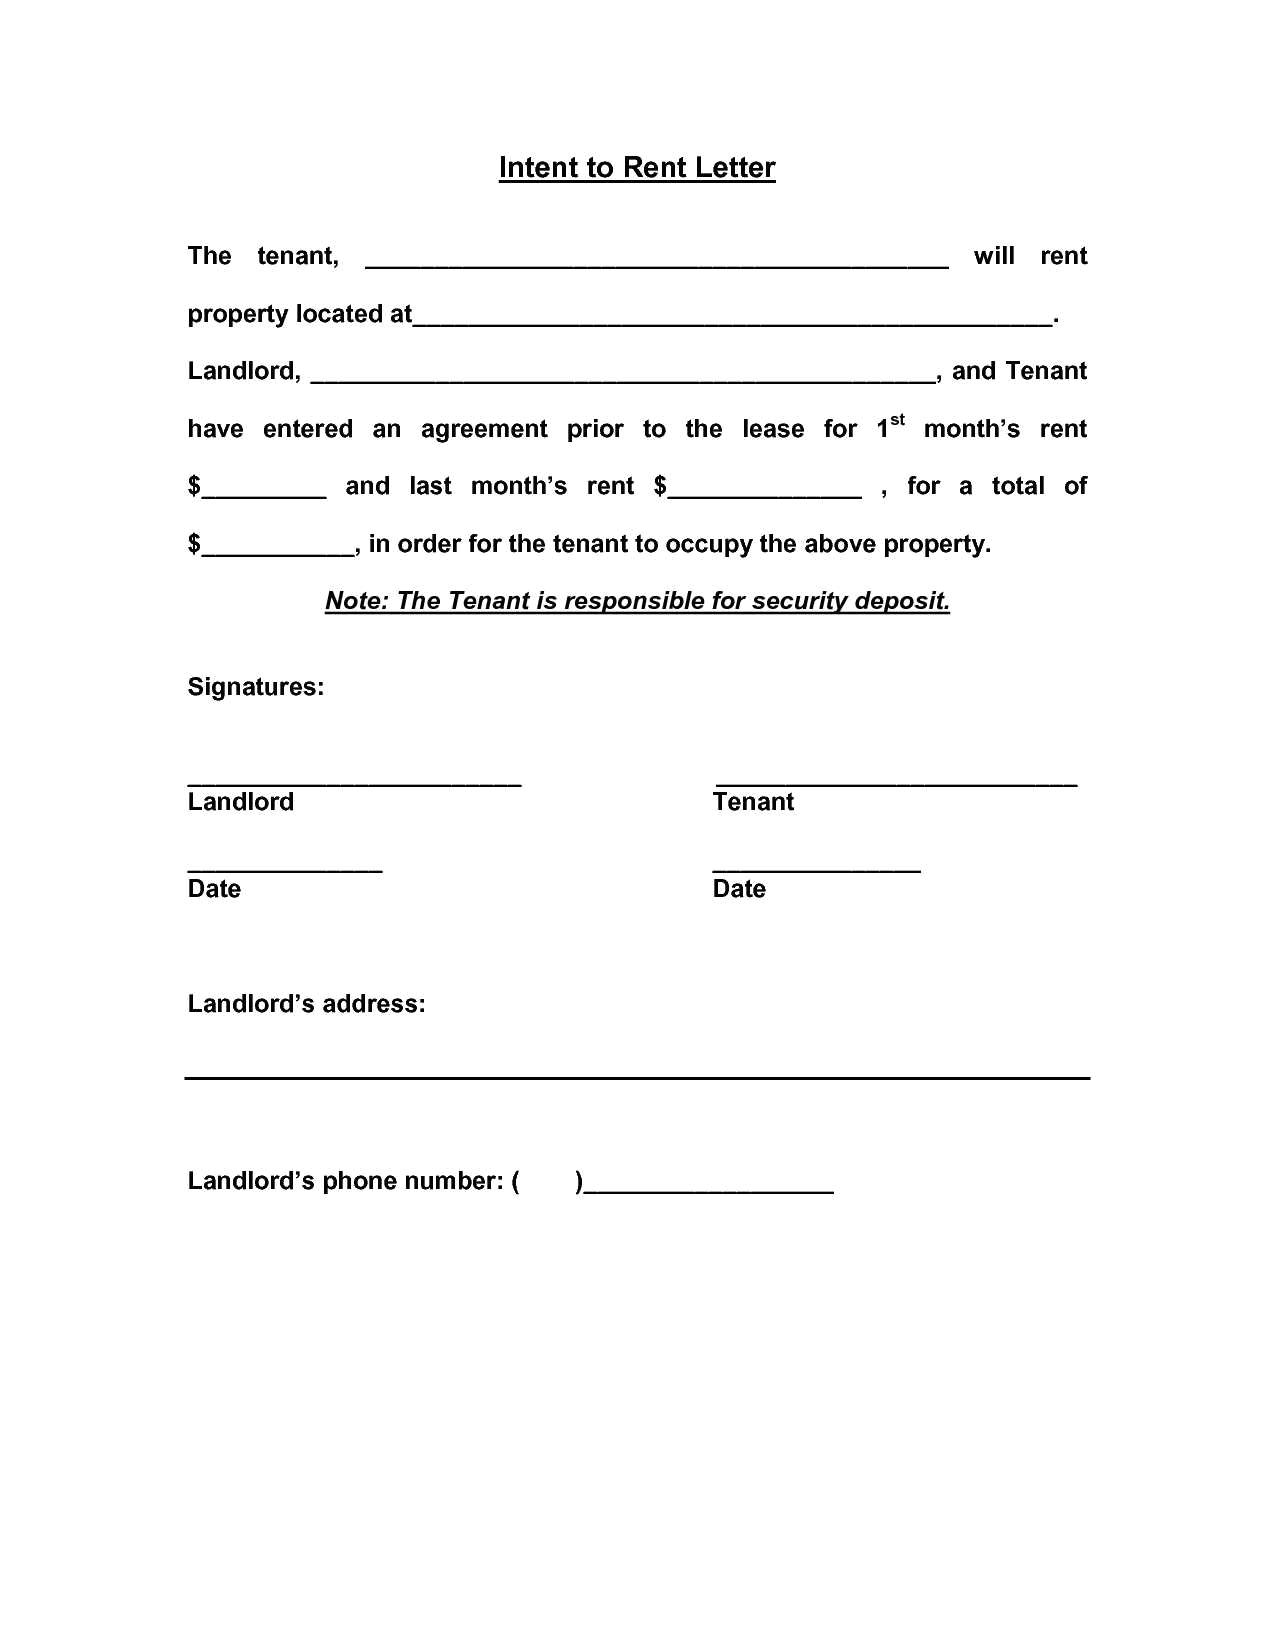 notarized child support agreement sample